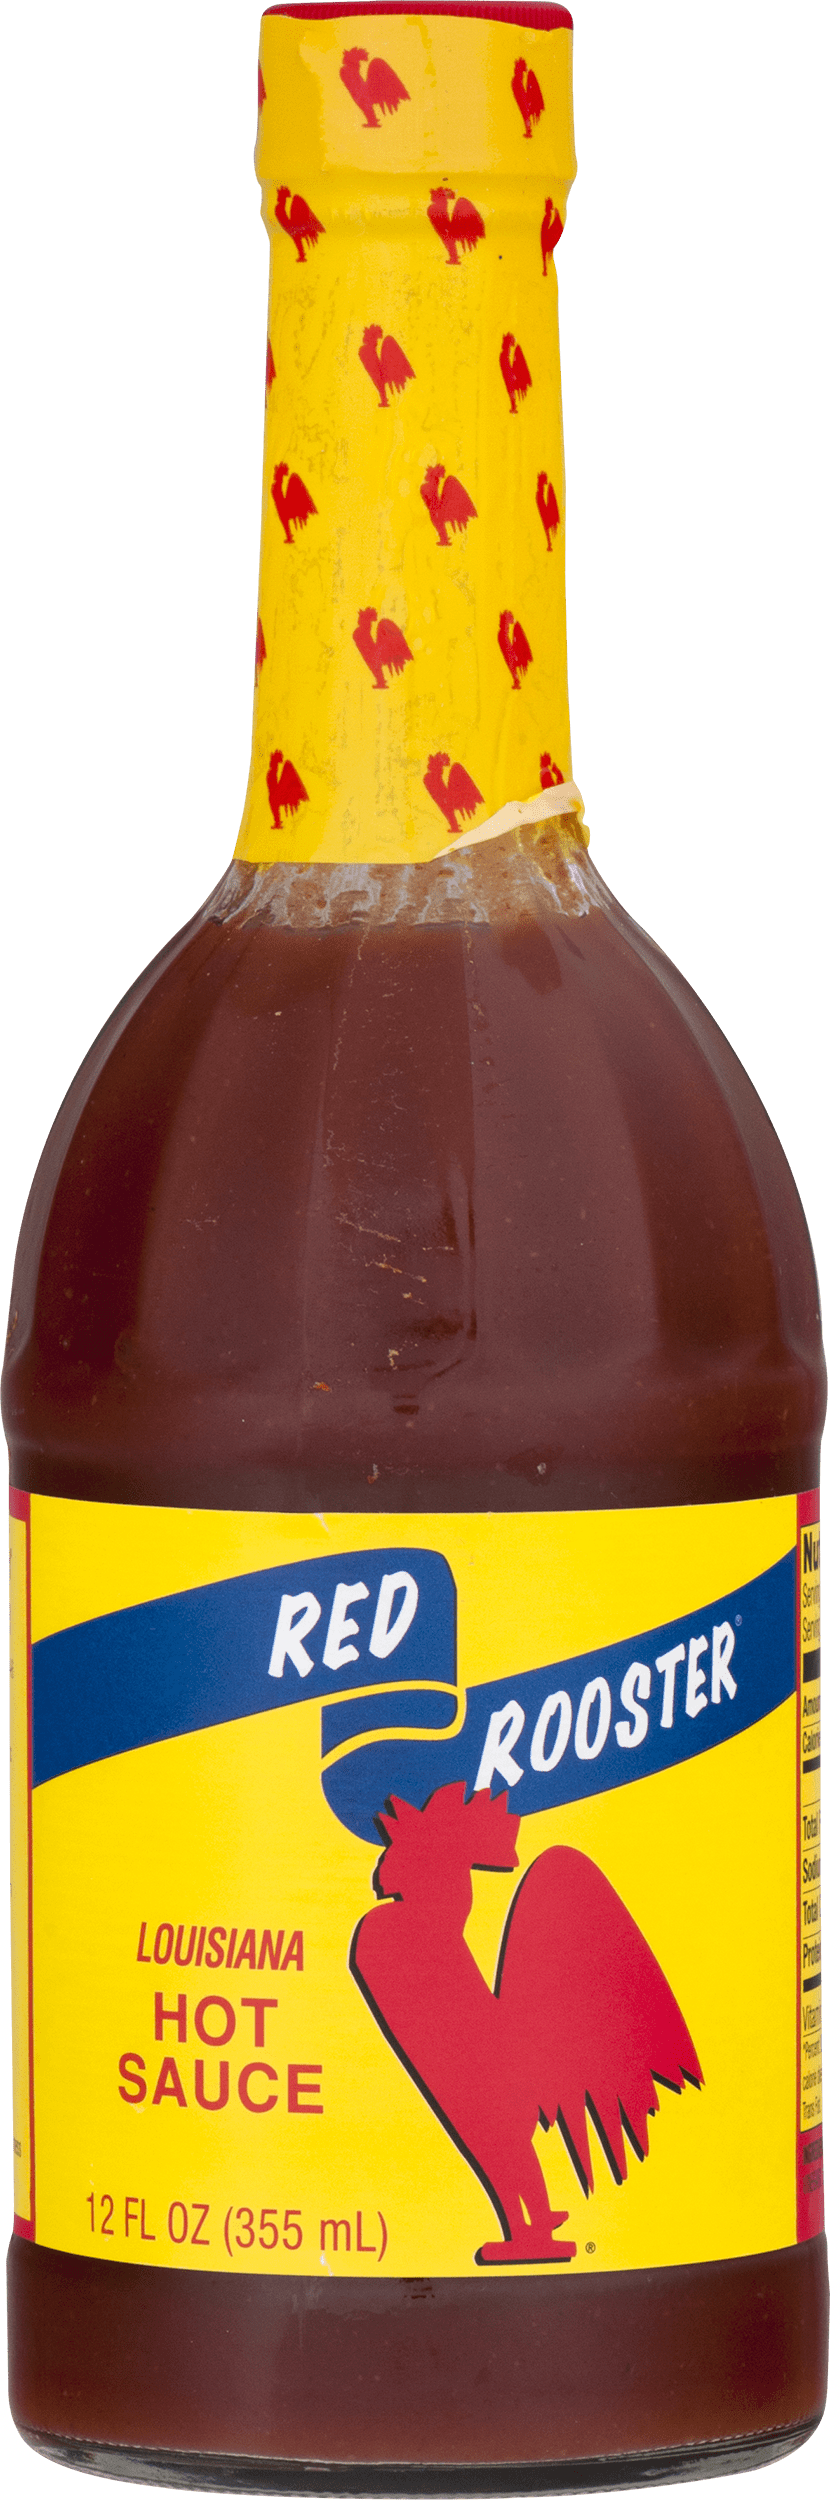 Louisiana Brand Red Rooster Hot Sauce, 12 fl oz